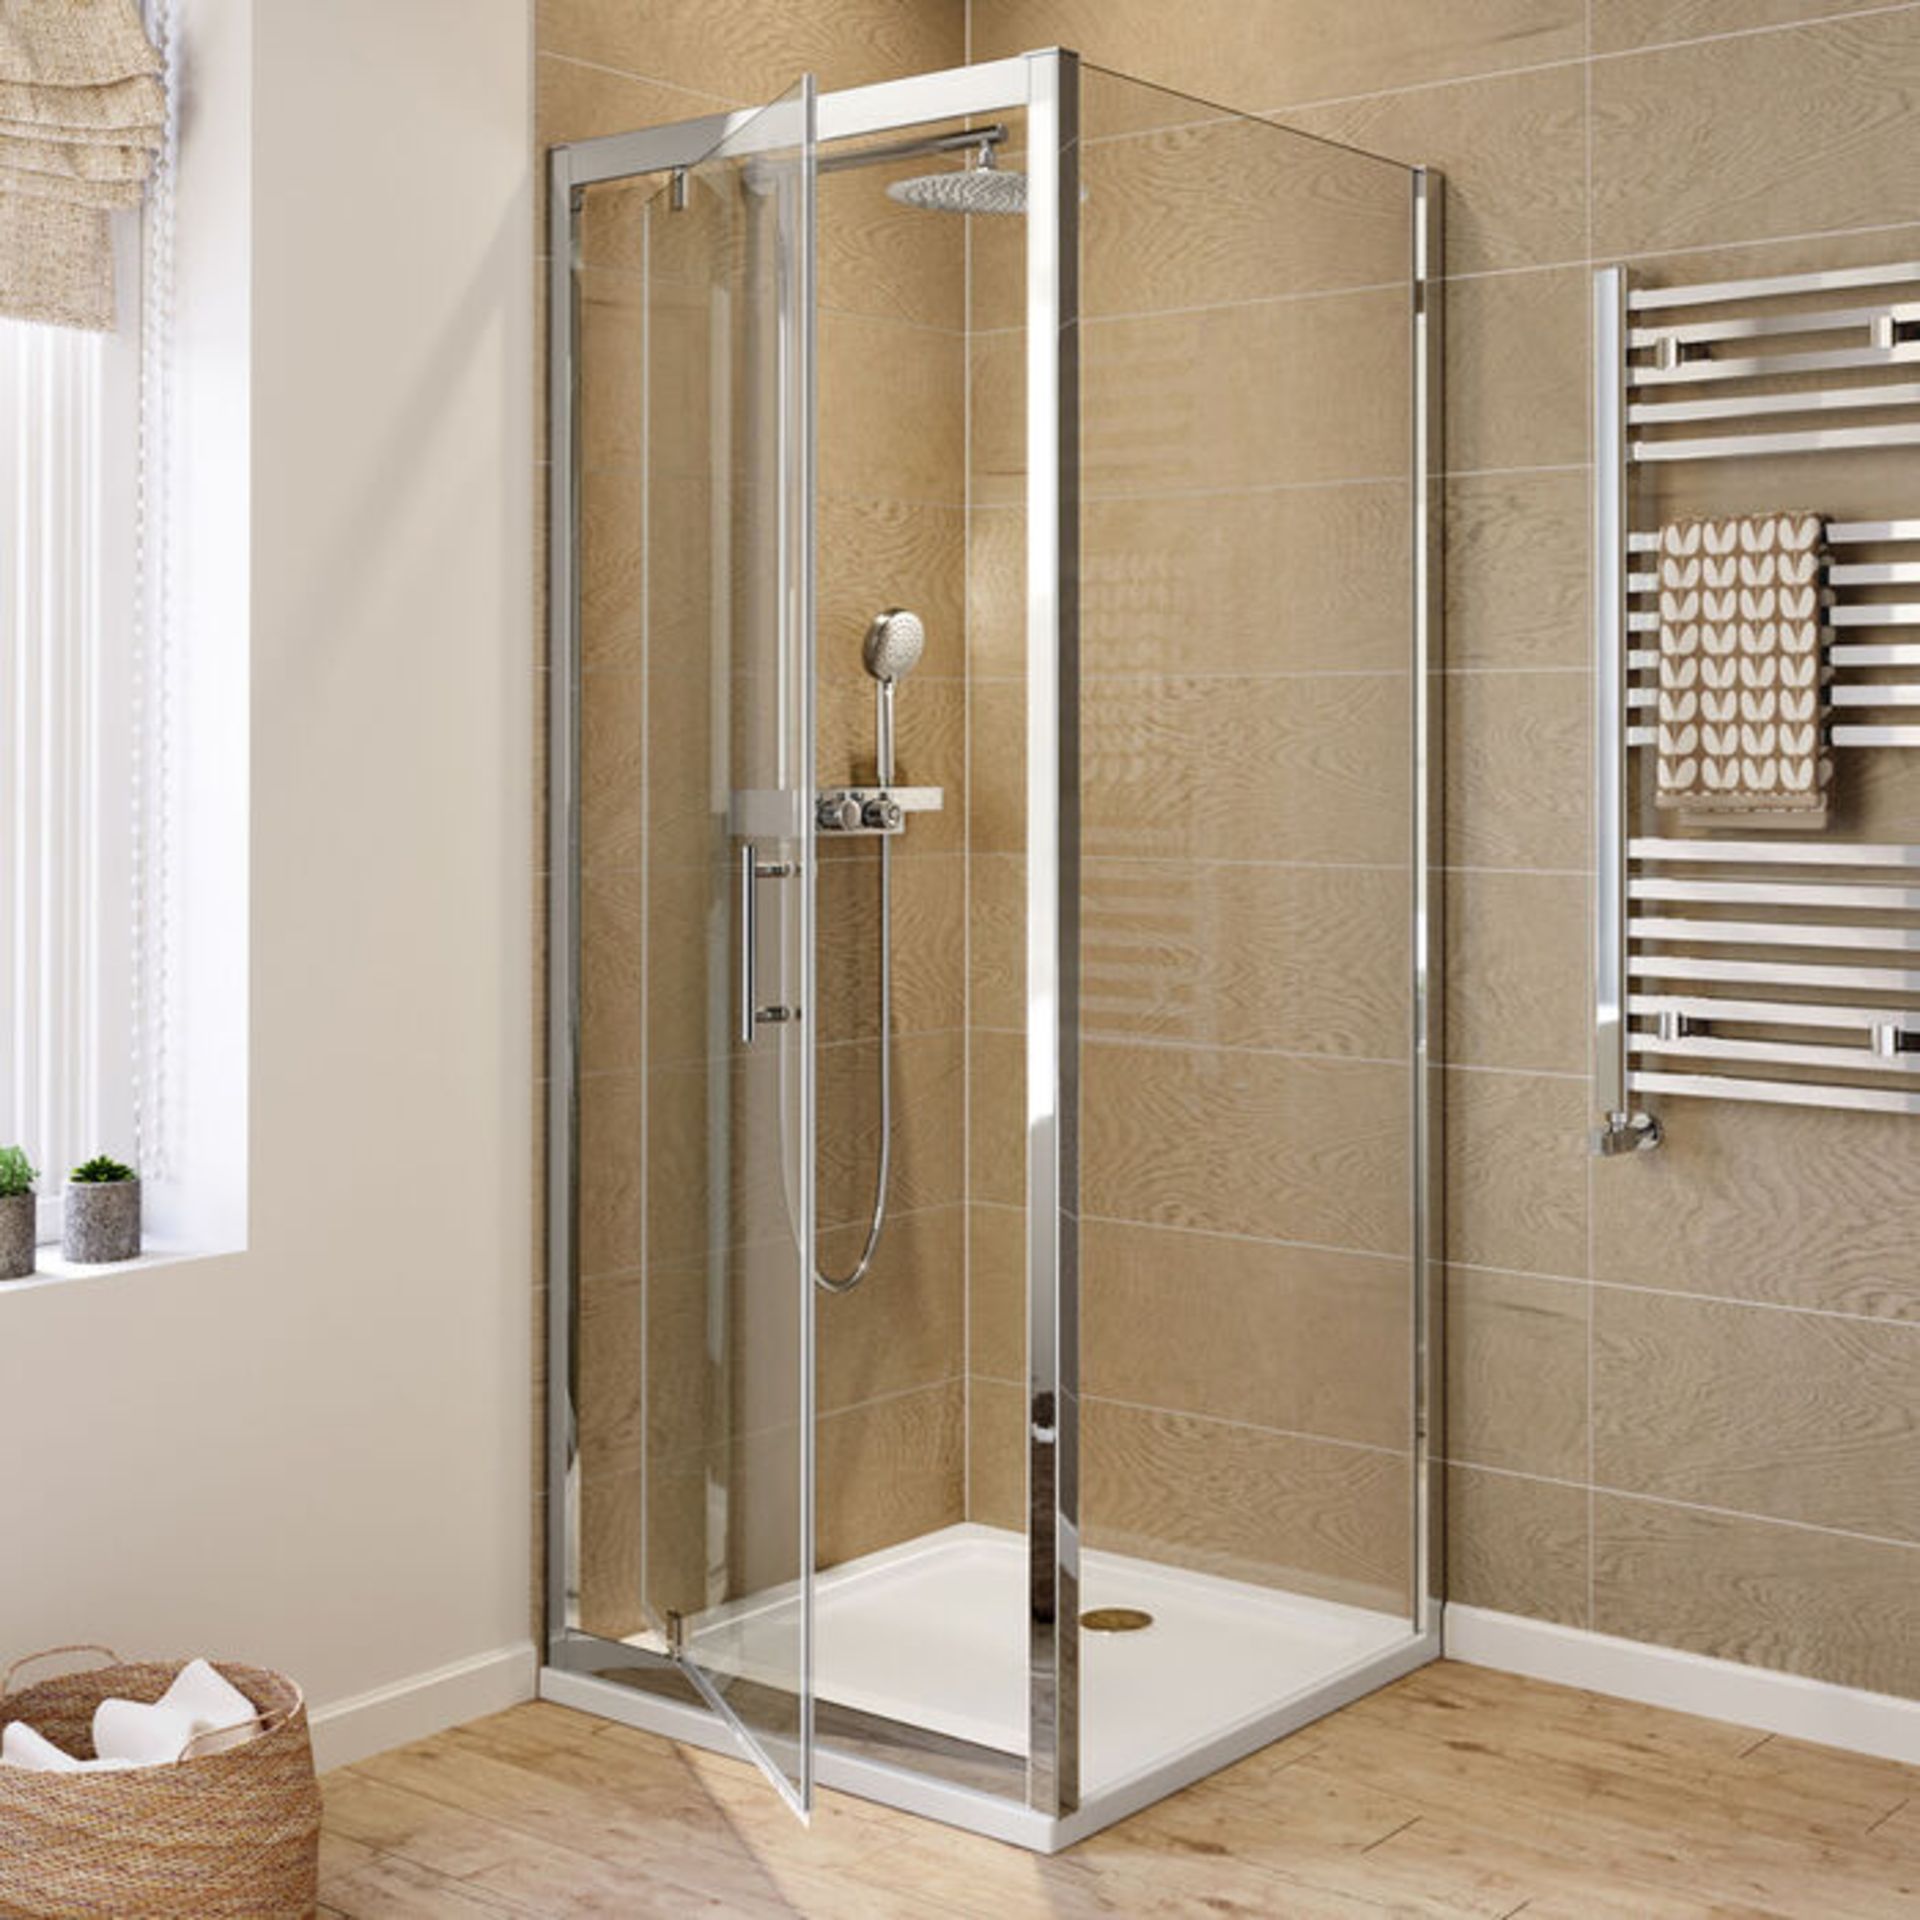 (Z101) 760x760mm - 6mm - Elements Pivot Door Shower Enclosure. RRP £309.99. 6mm Safety Glass ... - Image 2 of 4